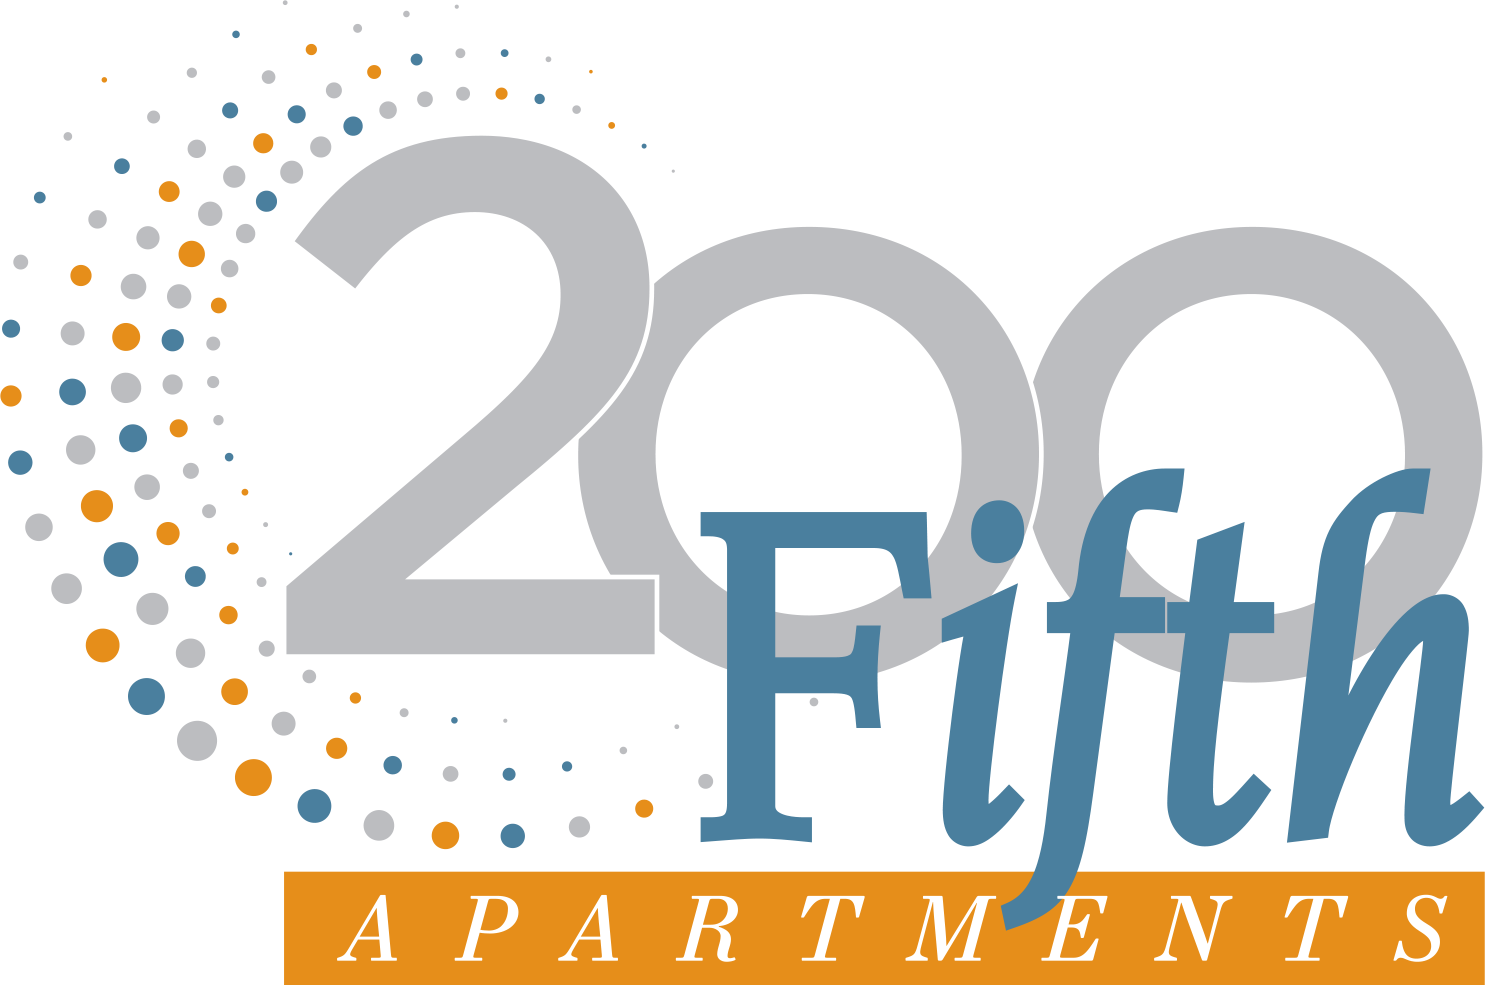 200 Fifth Ave Apartments logo